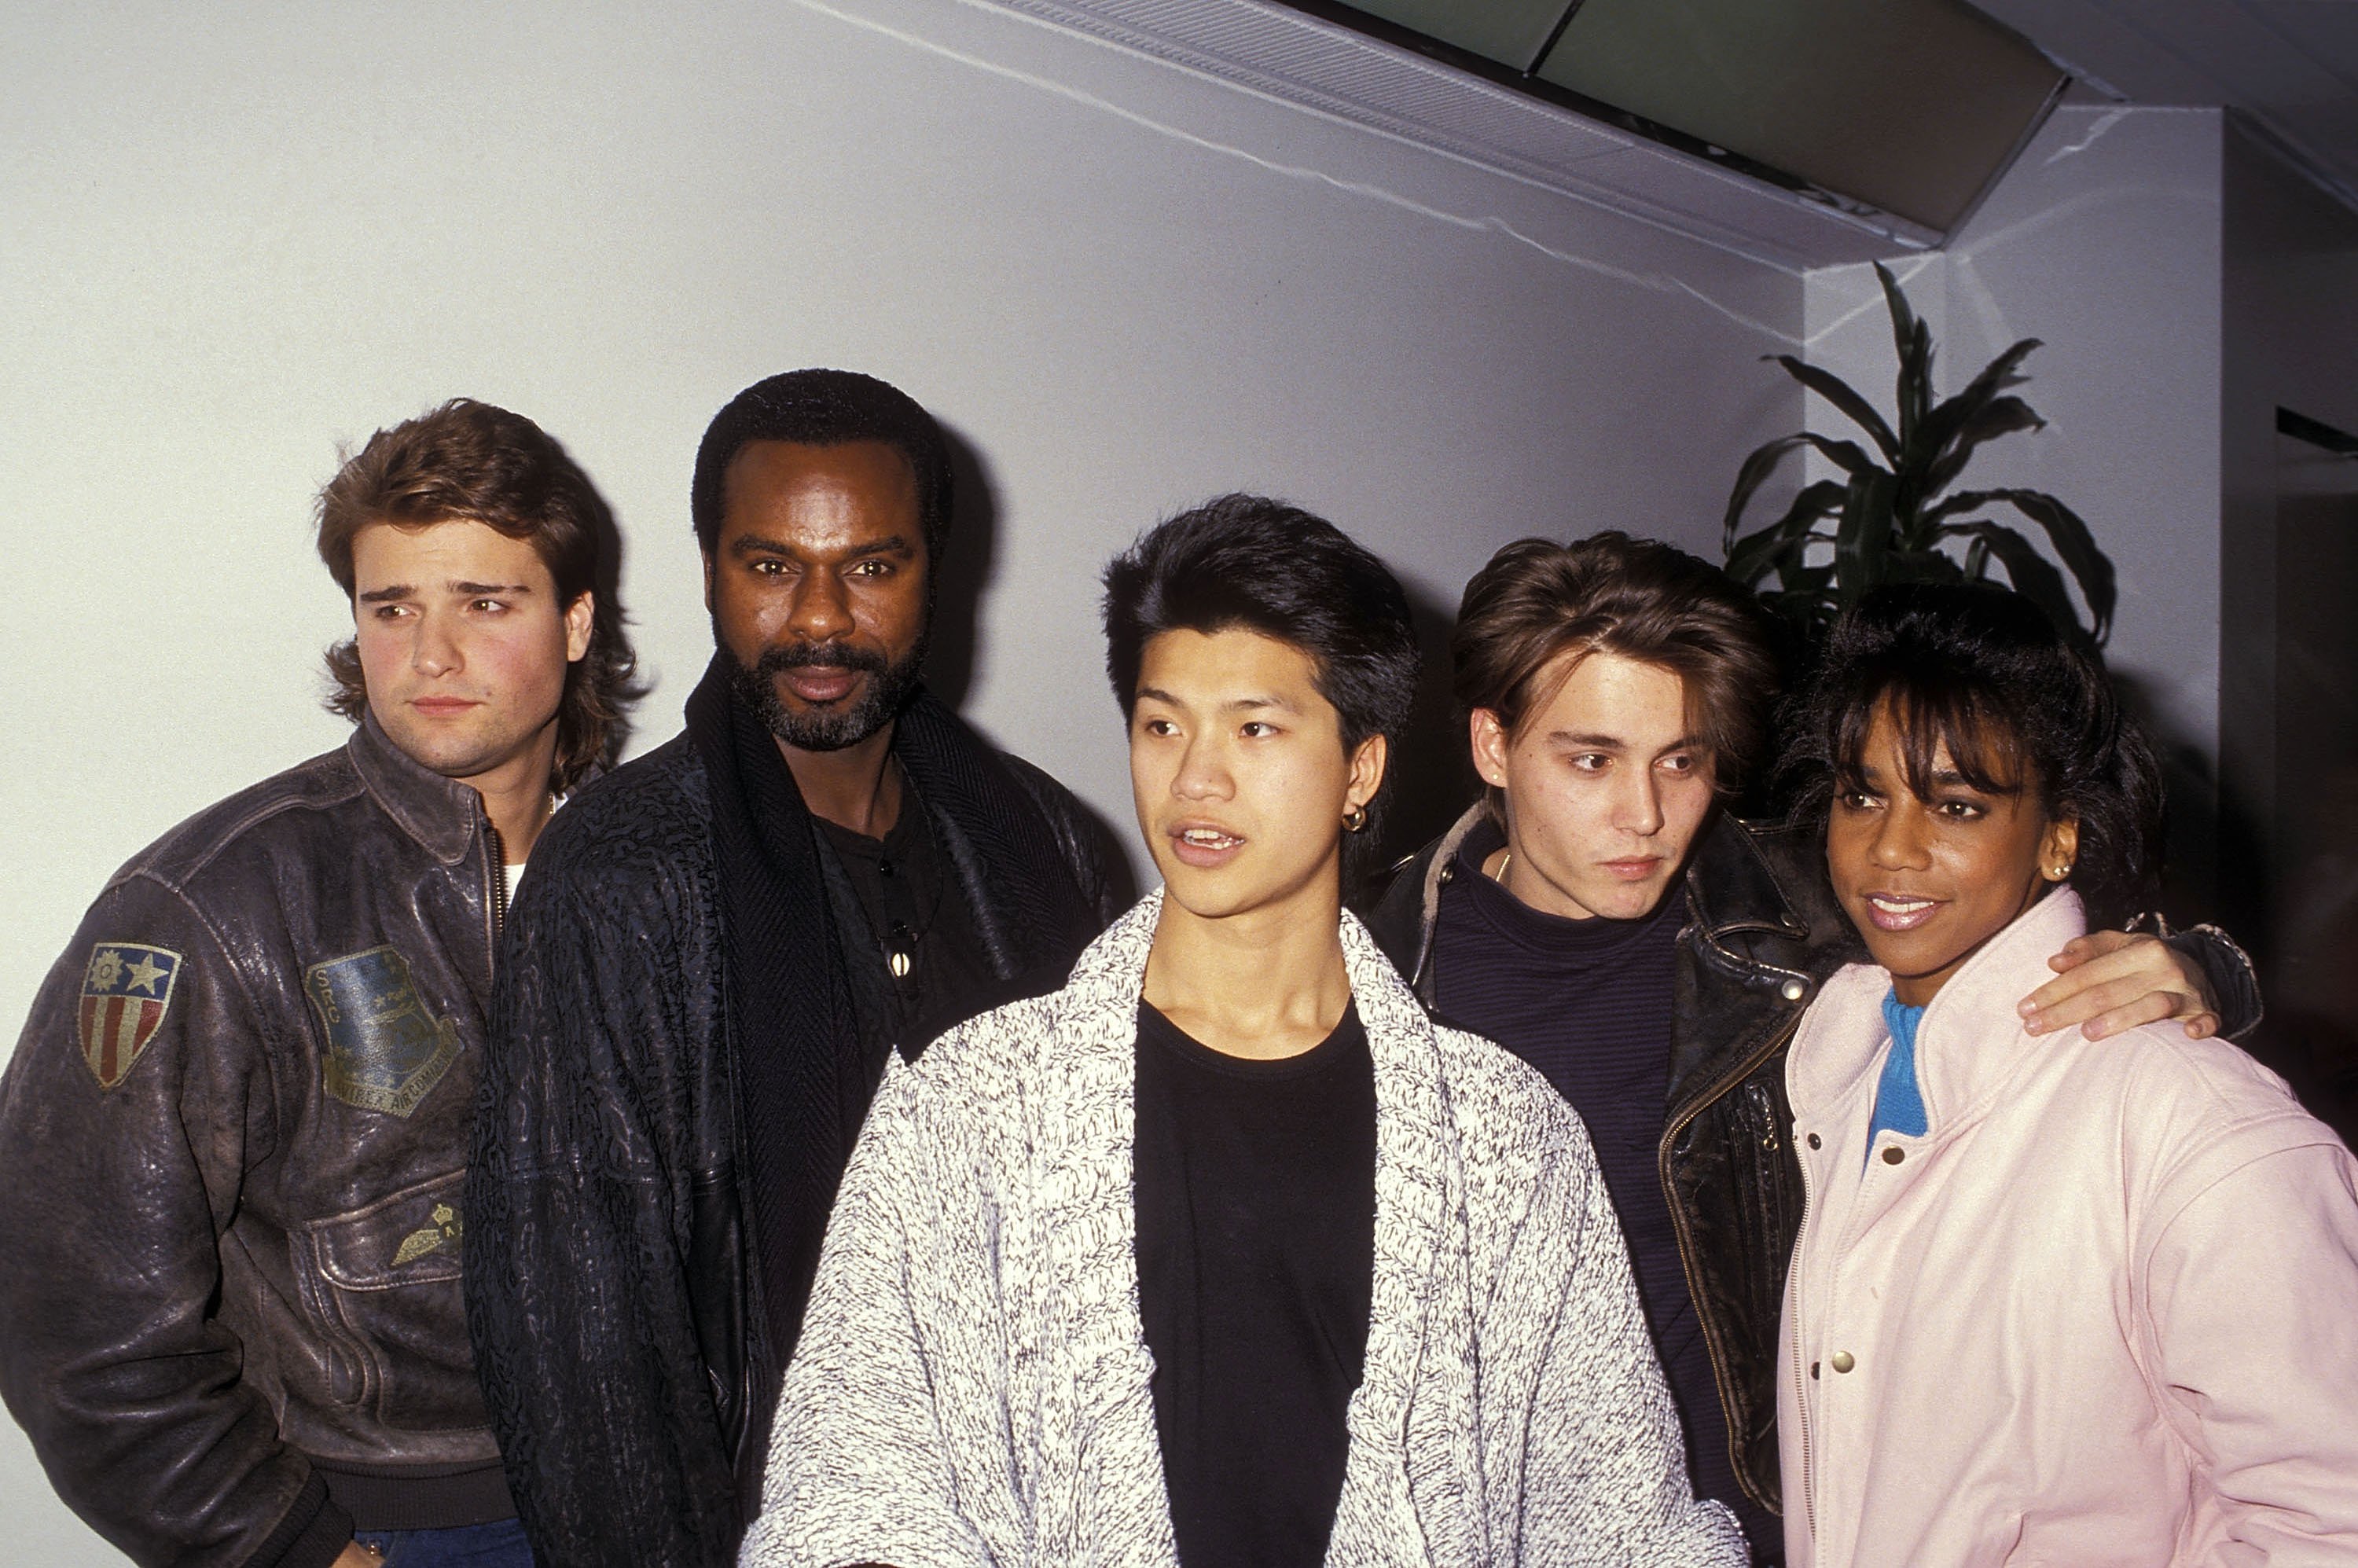 Cast of '21 Jump Street': (l-r) Peter DeLuise, Steven Williams, Dustin Nguyen, Johnny Depp and Holly Robinson